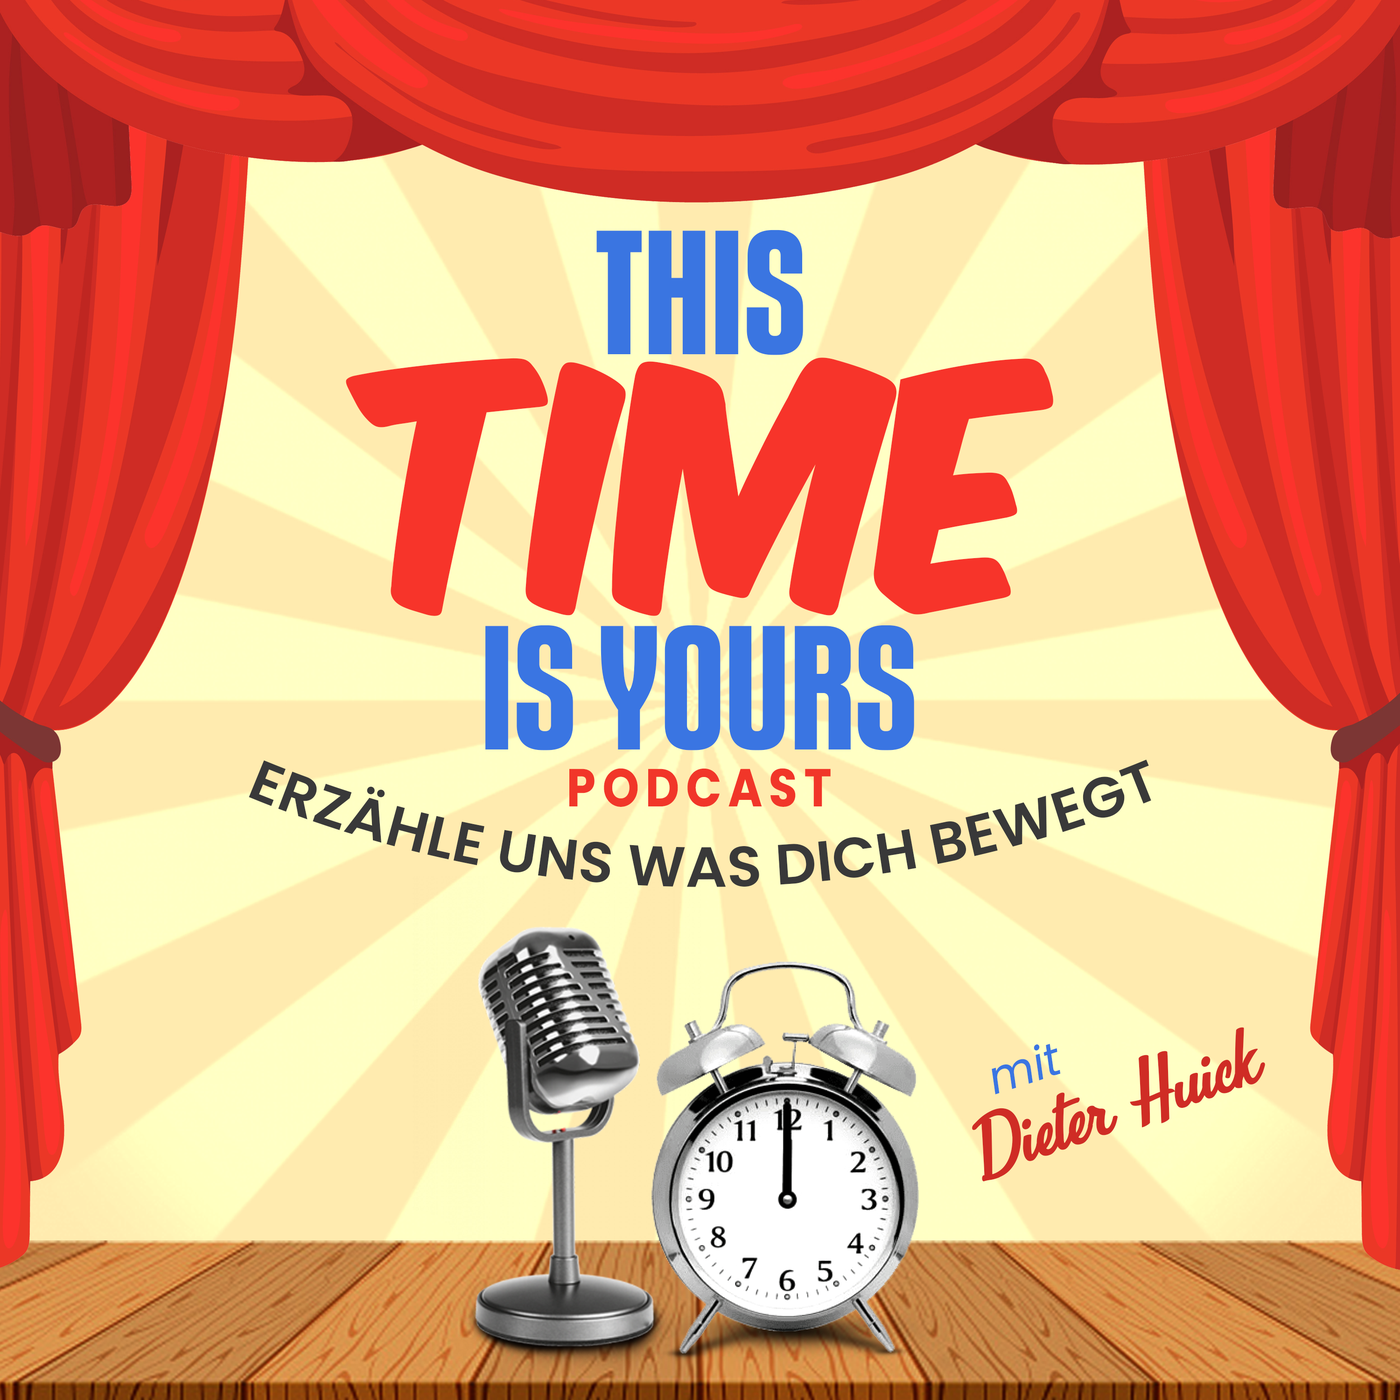 This Time is Yours erzähle uns was dich bewegt.